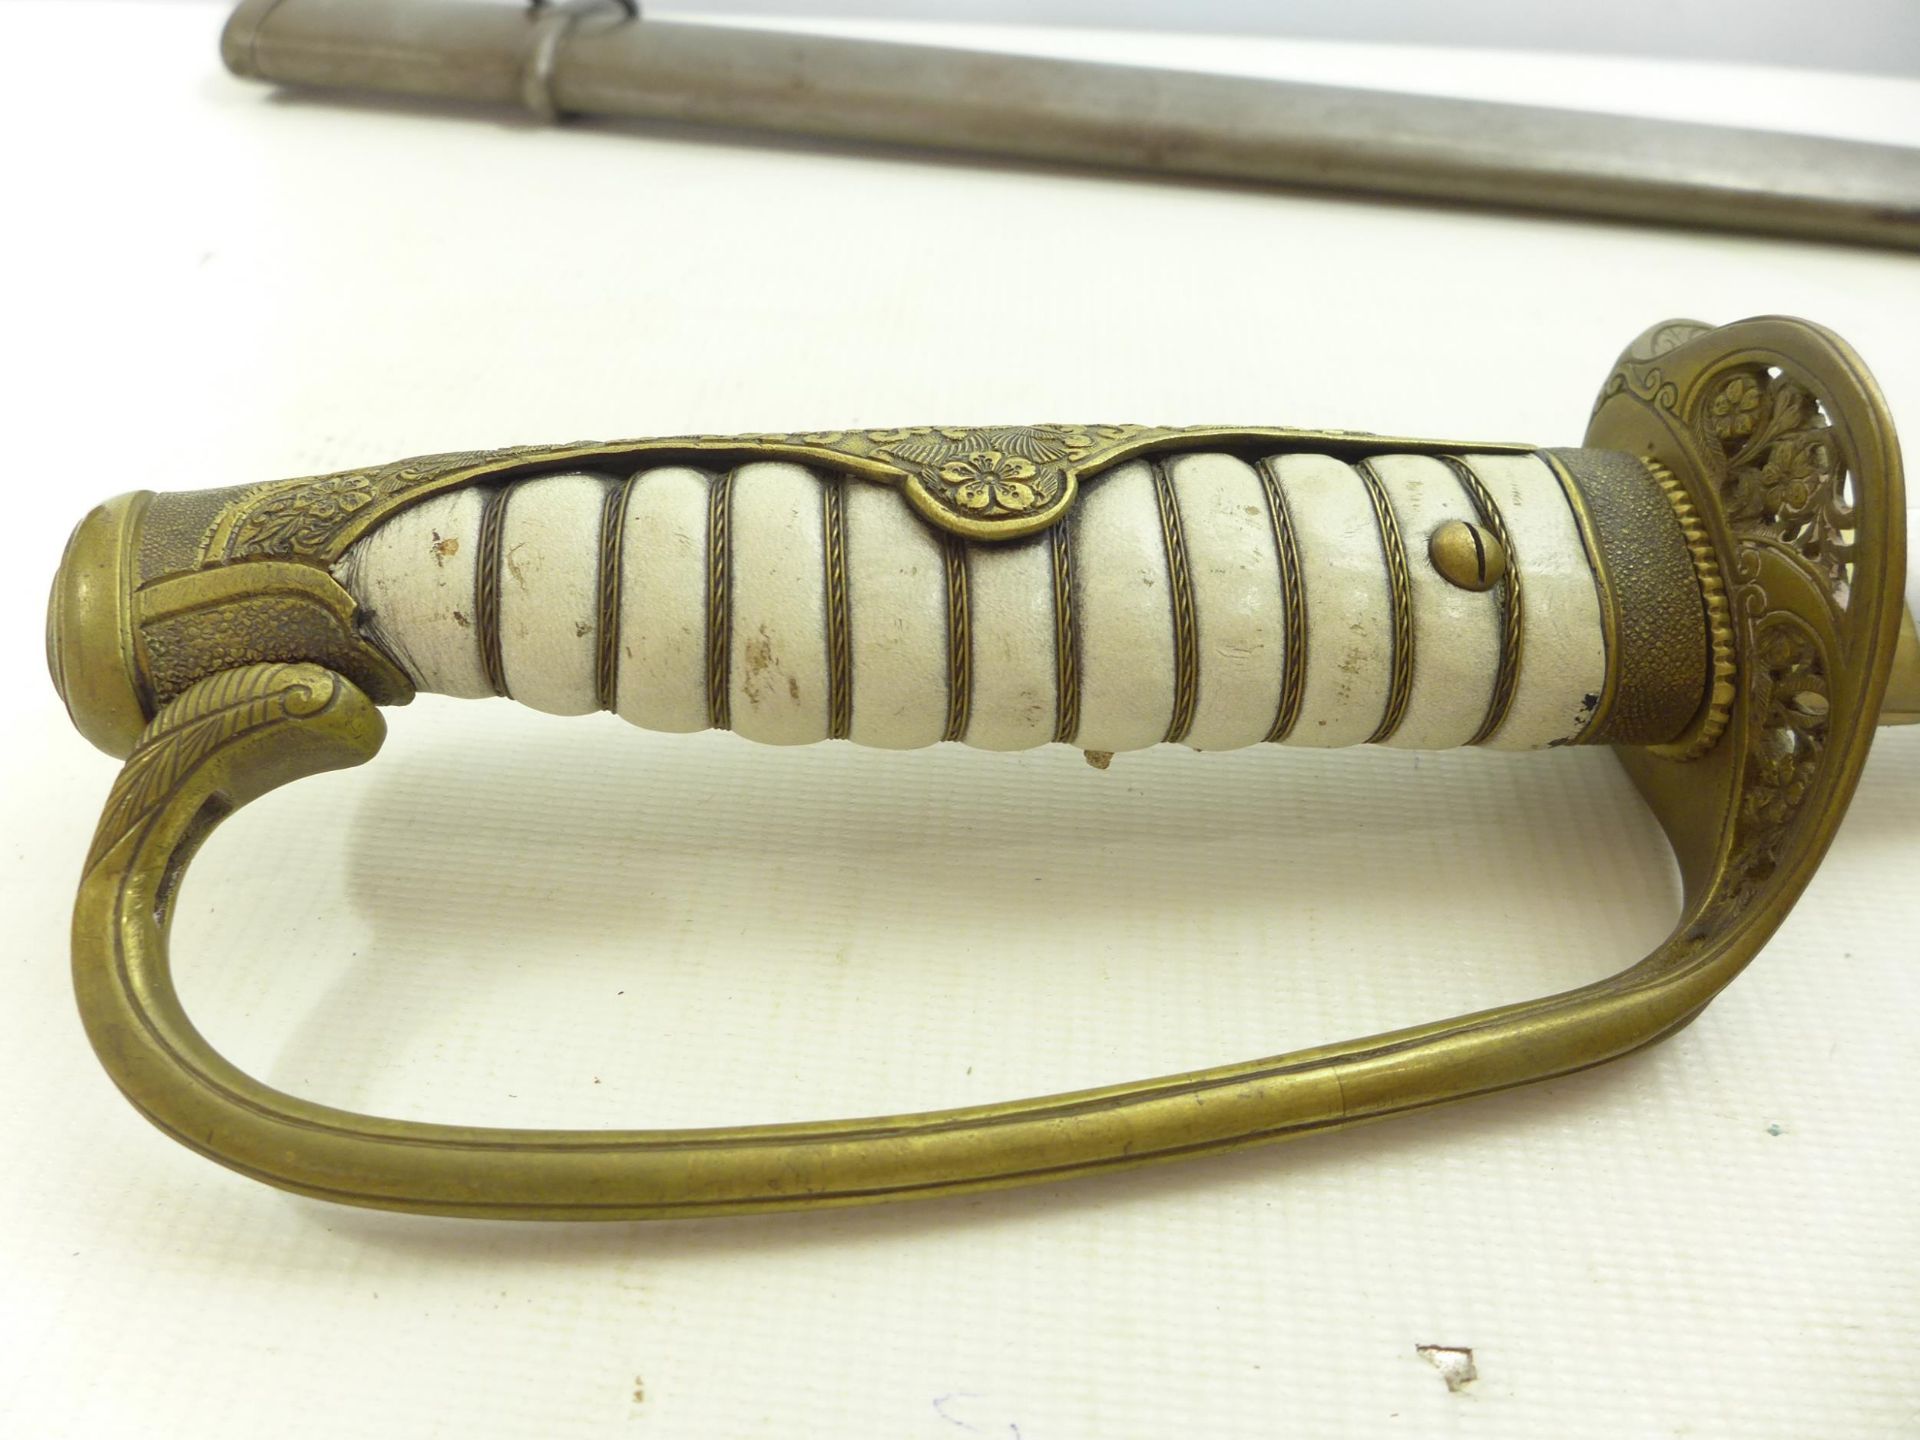 A JAPANESE CAVALRY OFFICERS SWORD AND SCABBARD, 64CM BLADE, PIERCED BRASS GUARD - Image 6 of 10